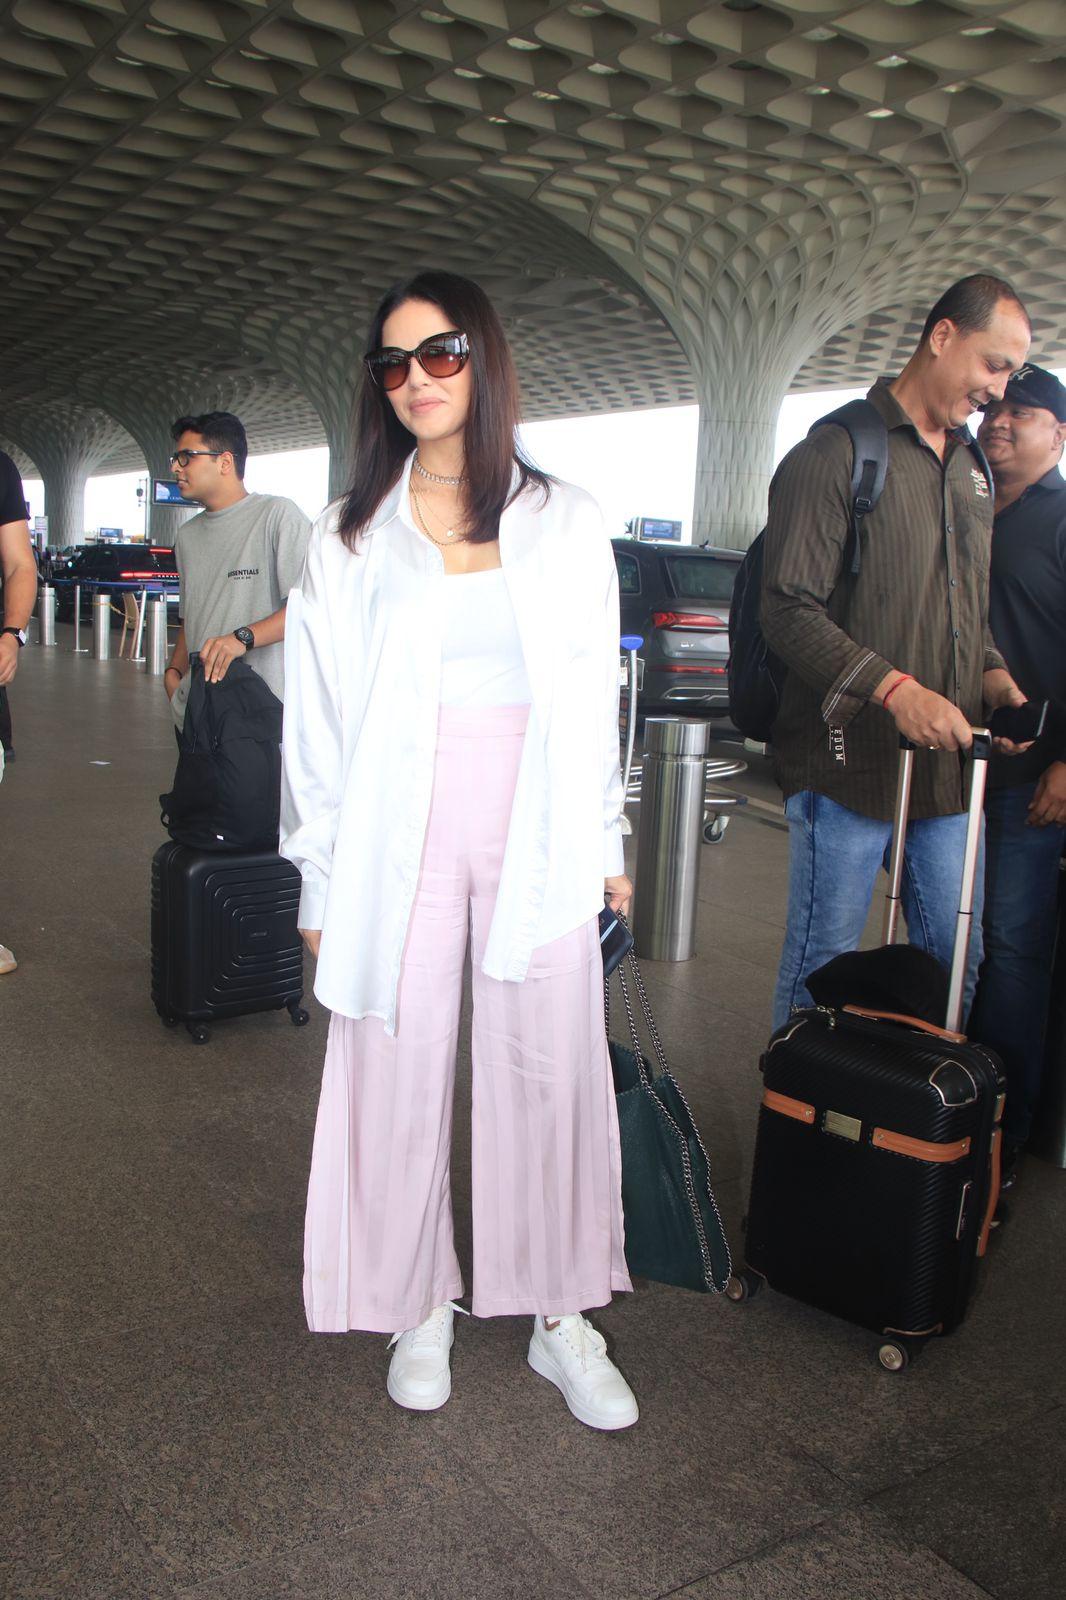 The stunning Sunny Leone was spotted at the airport as well.